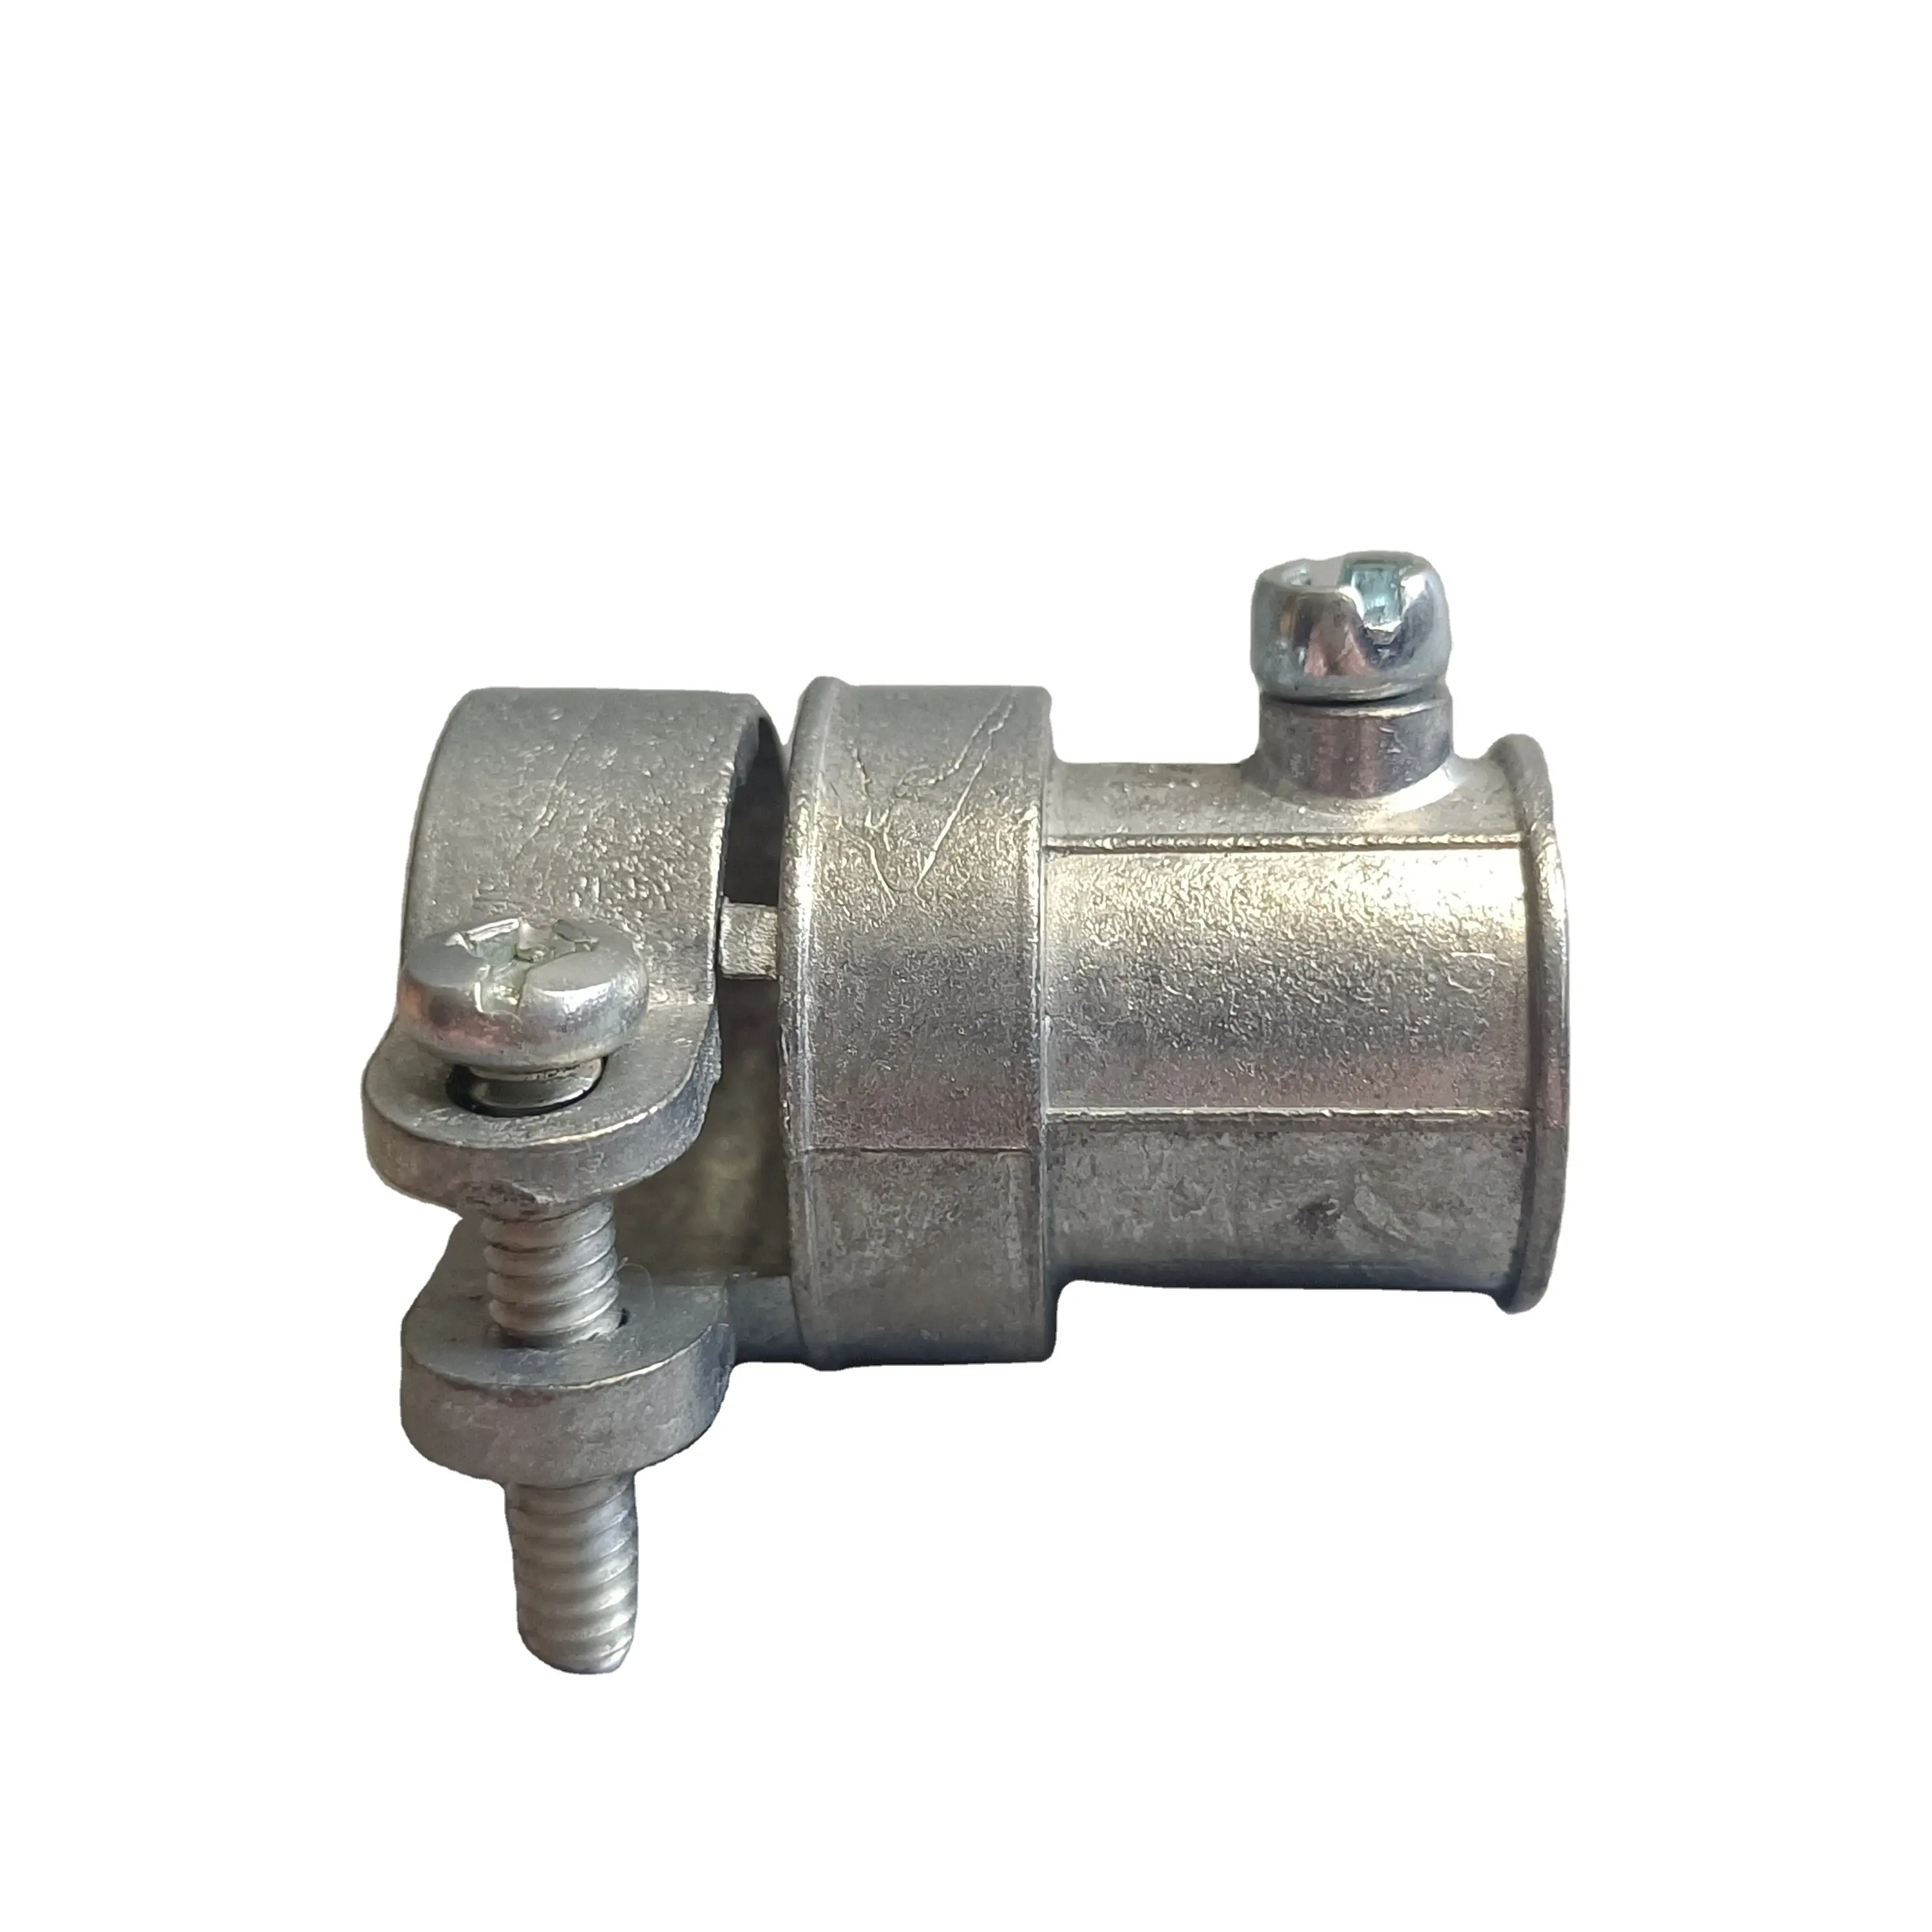 1/2" Silver EMT to FMC Transition Coupling; Squeeze Compression EMT to Flex Set Screw Coupling Electrical Conduit Fittings